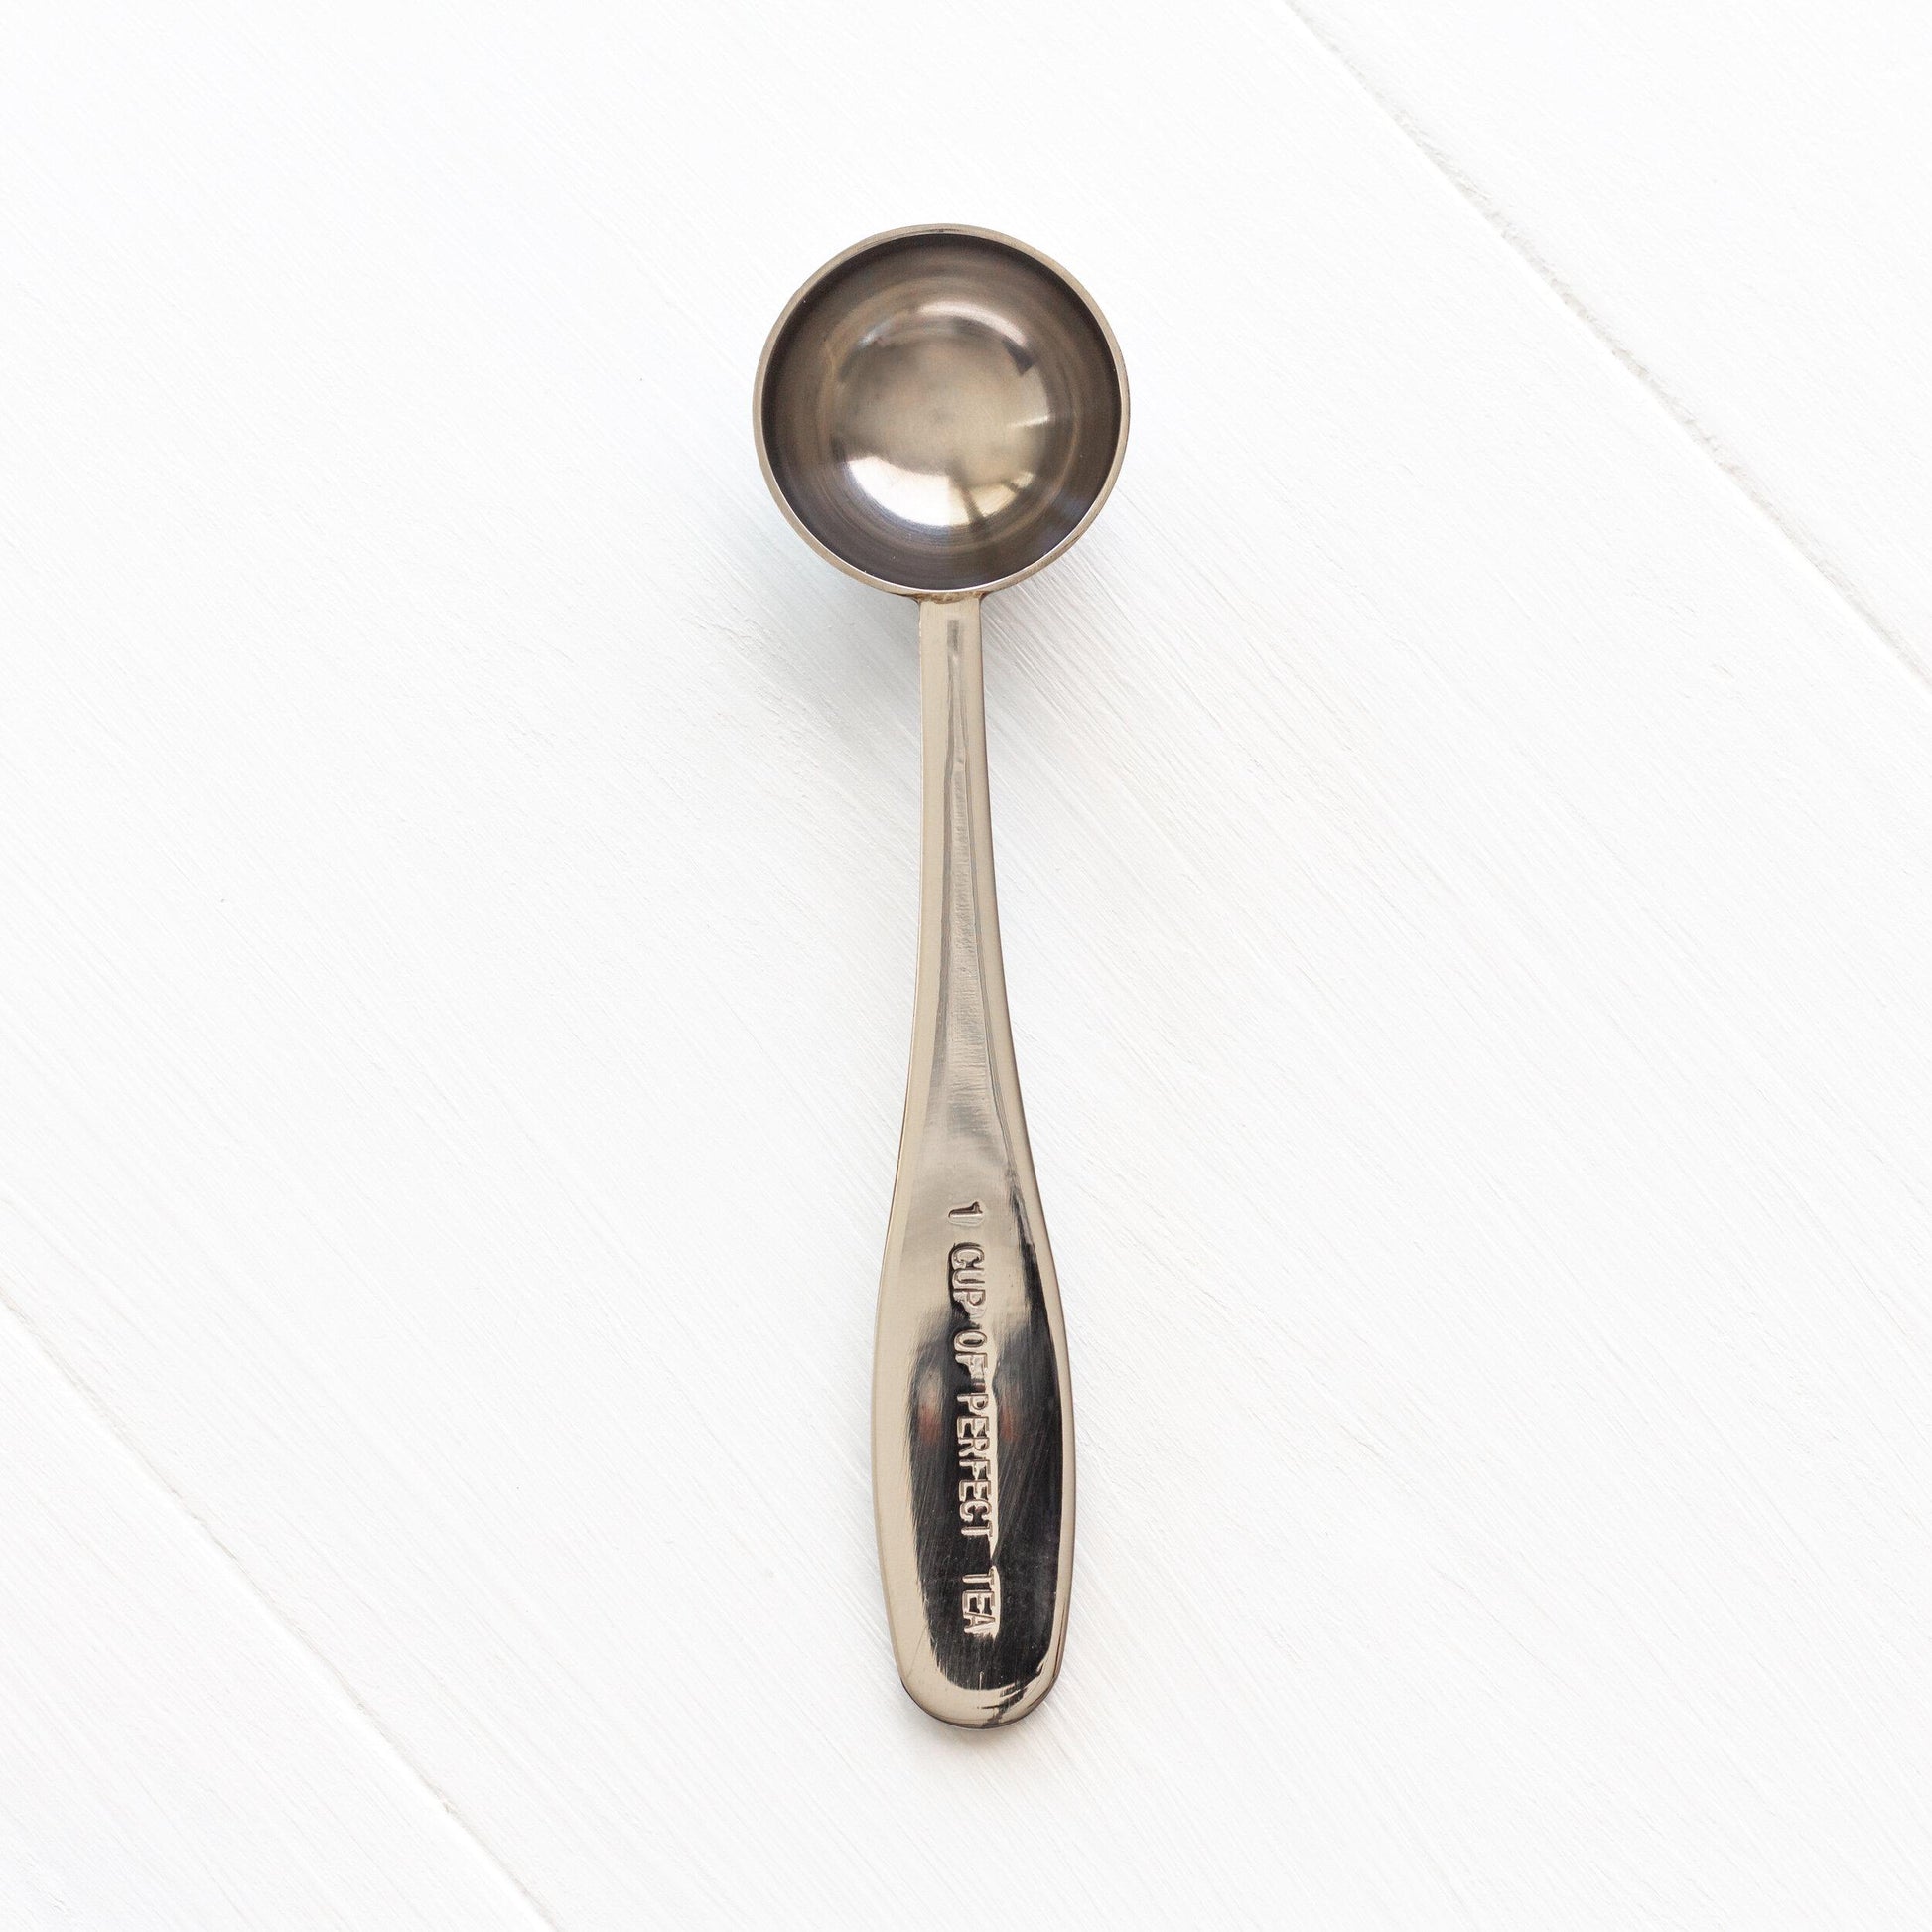 Measuring spoons, Cups & Jugs - Shop at